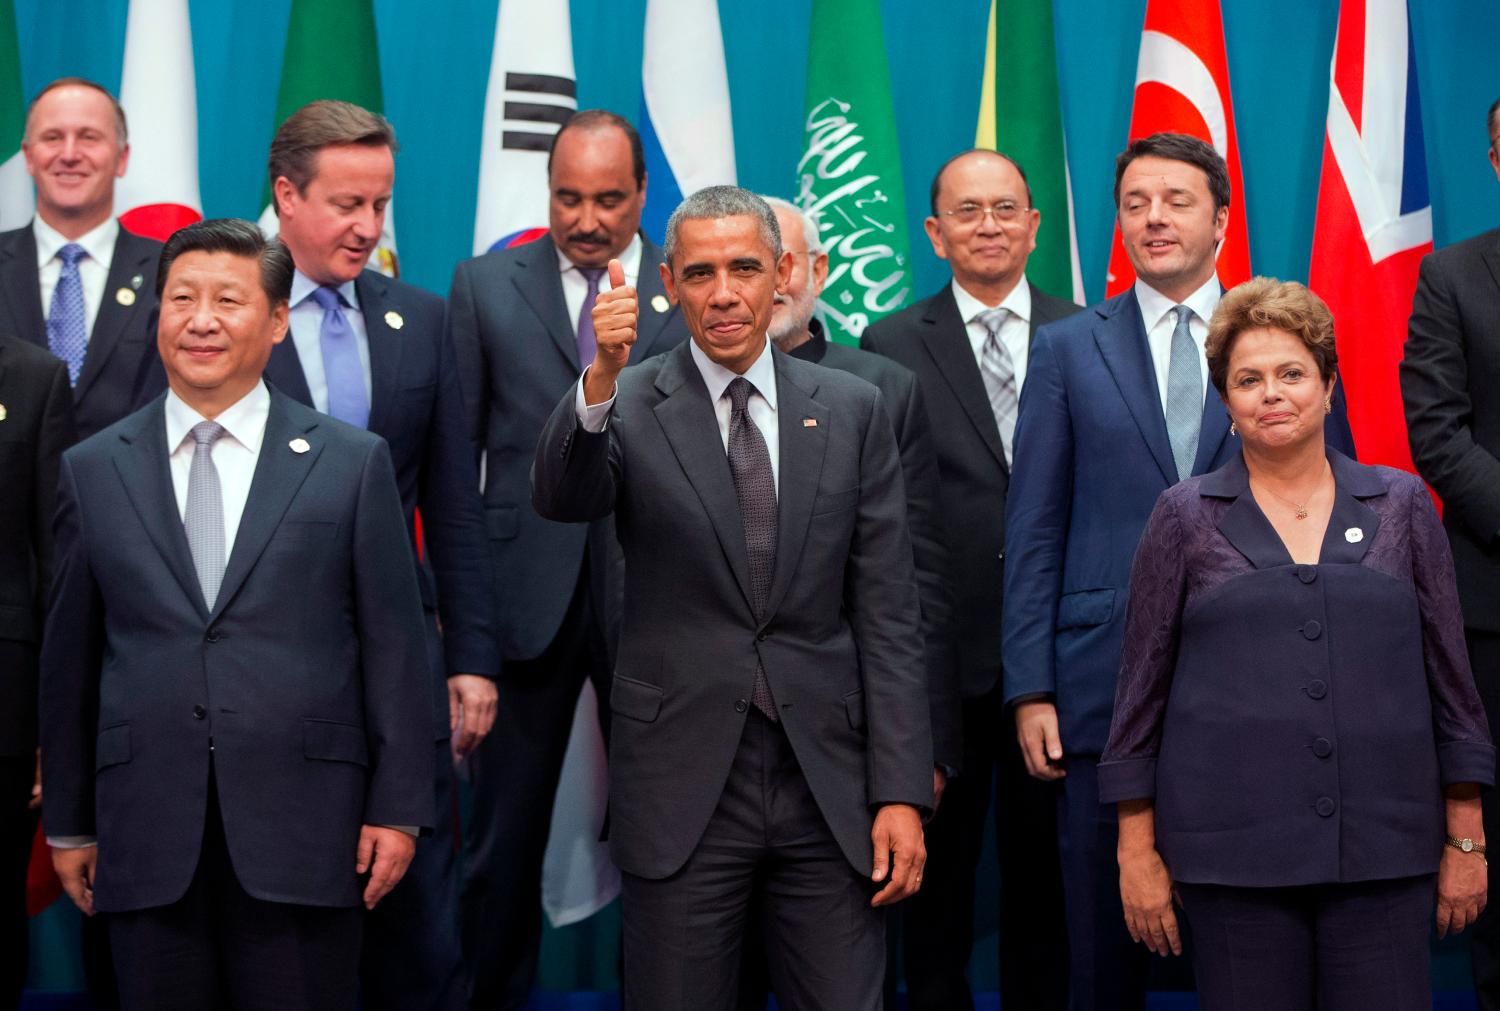 Reuters/Pablo Martinez Monsivais - U.S. President Barack Obama gives a thumbs-up to the camera as he and other leaders pose for a group photo at the G20 summit in Brisbane November 15, 2014.